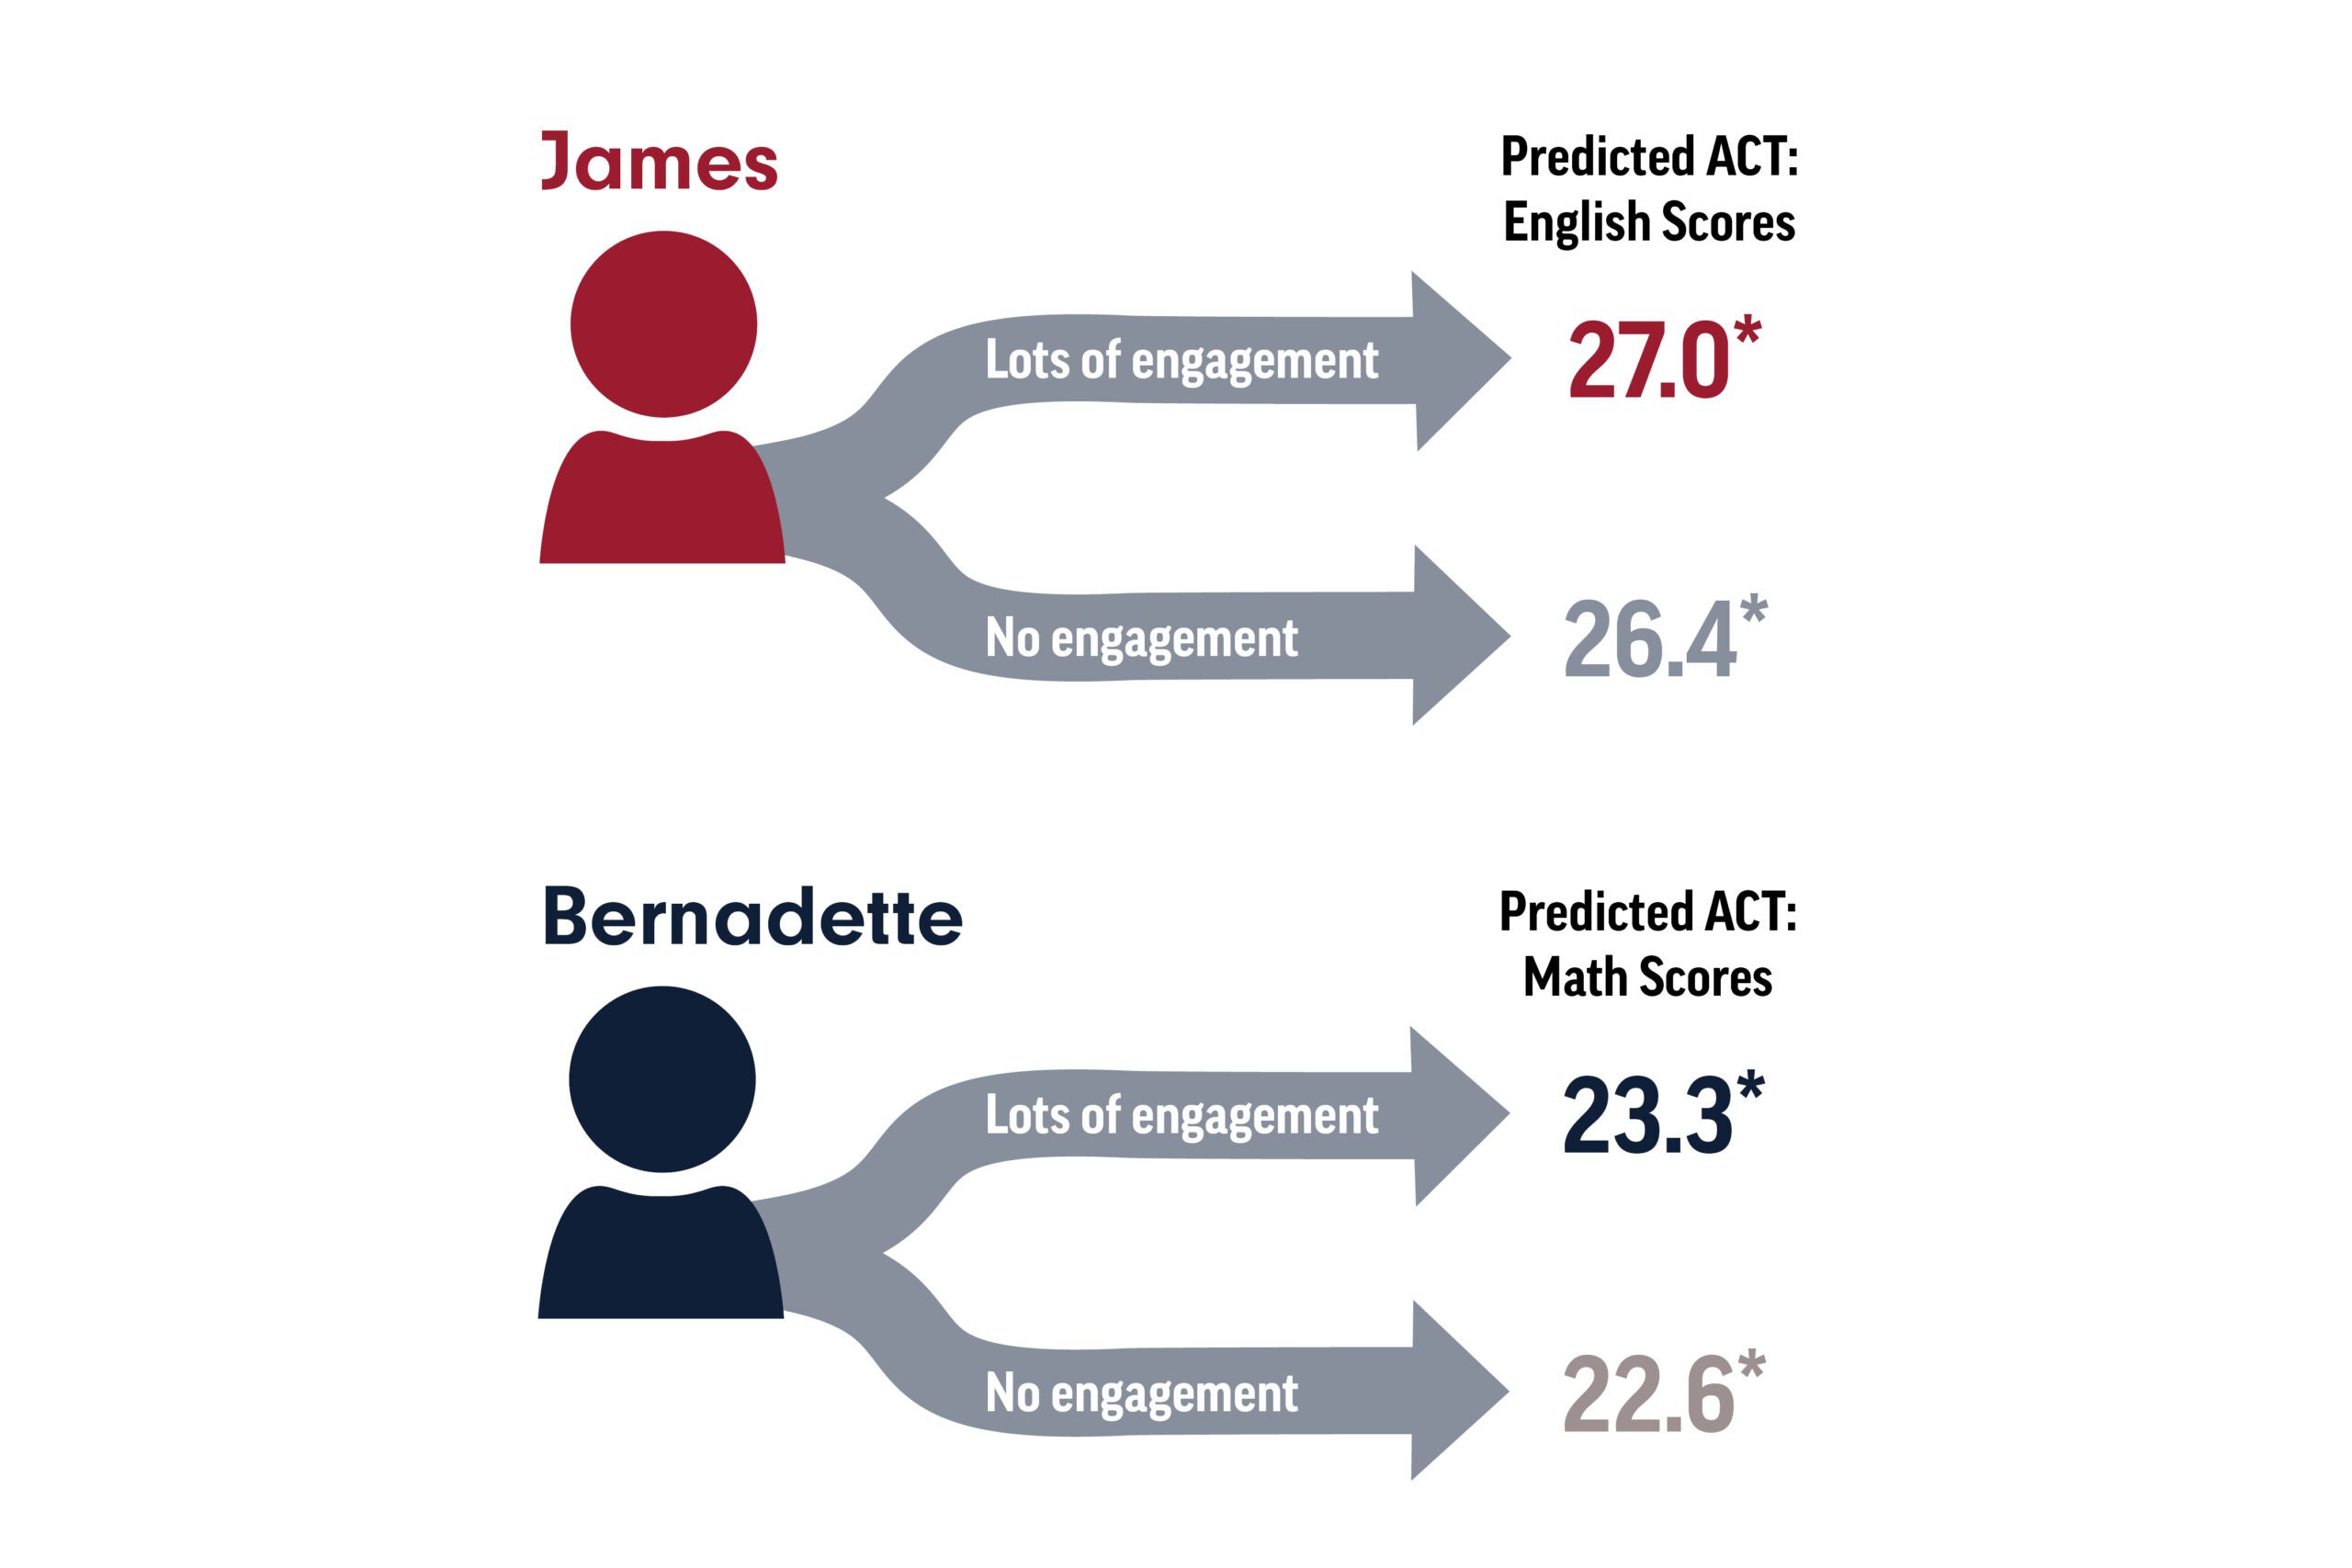 Figure 1 shows two specific examples. James: With lots of engagement, the predicted ACT: English Scores are 27.0*. With no engagement, the predicted ACT: English scores are 26.4*. Bernadette: With lots of engagement, the predicted ACT: Math Scores are 23.3*. With no engagement, the predicted ACT: Math scores are 22.6*.